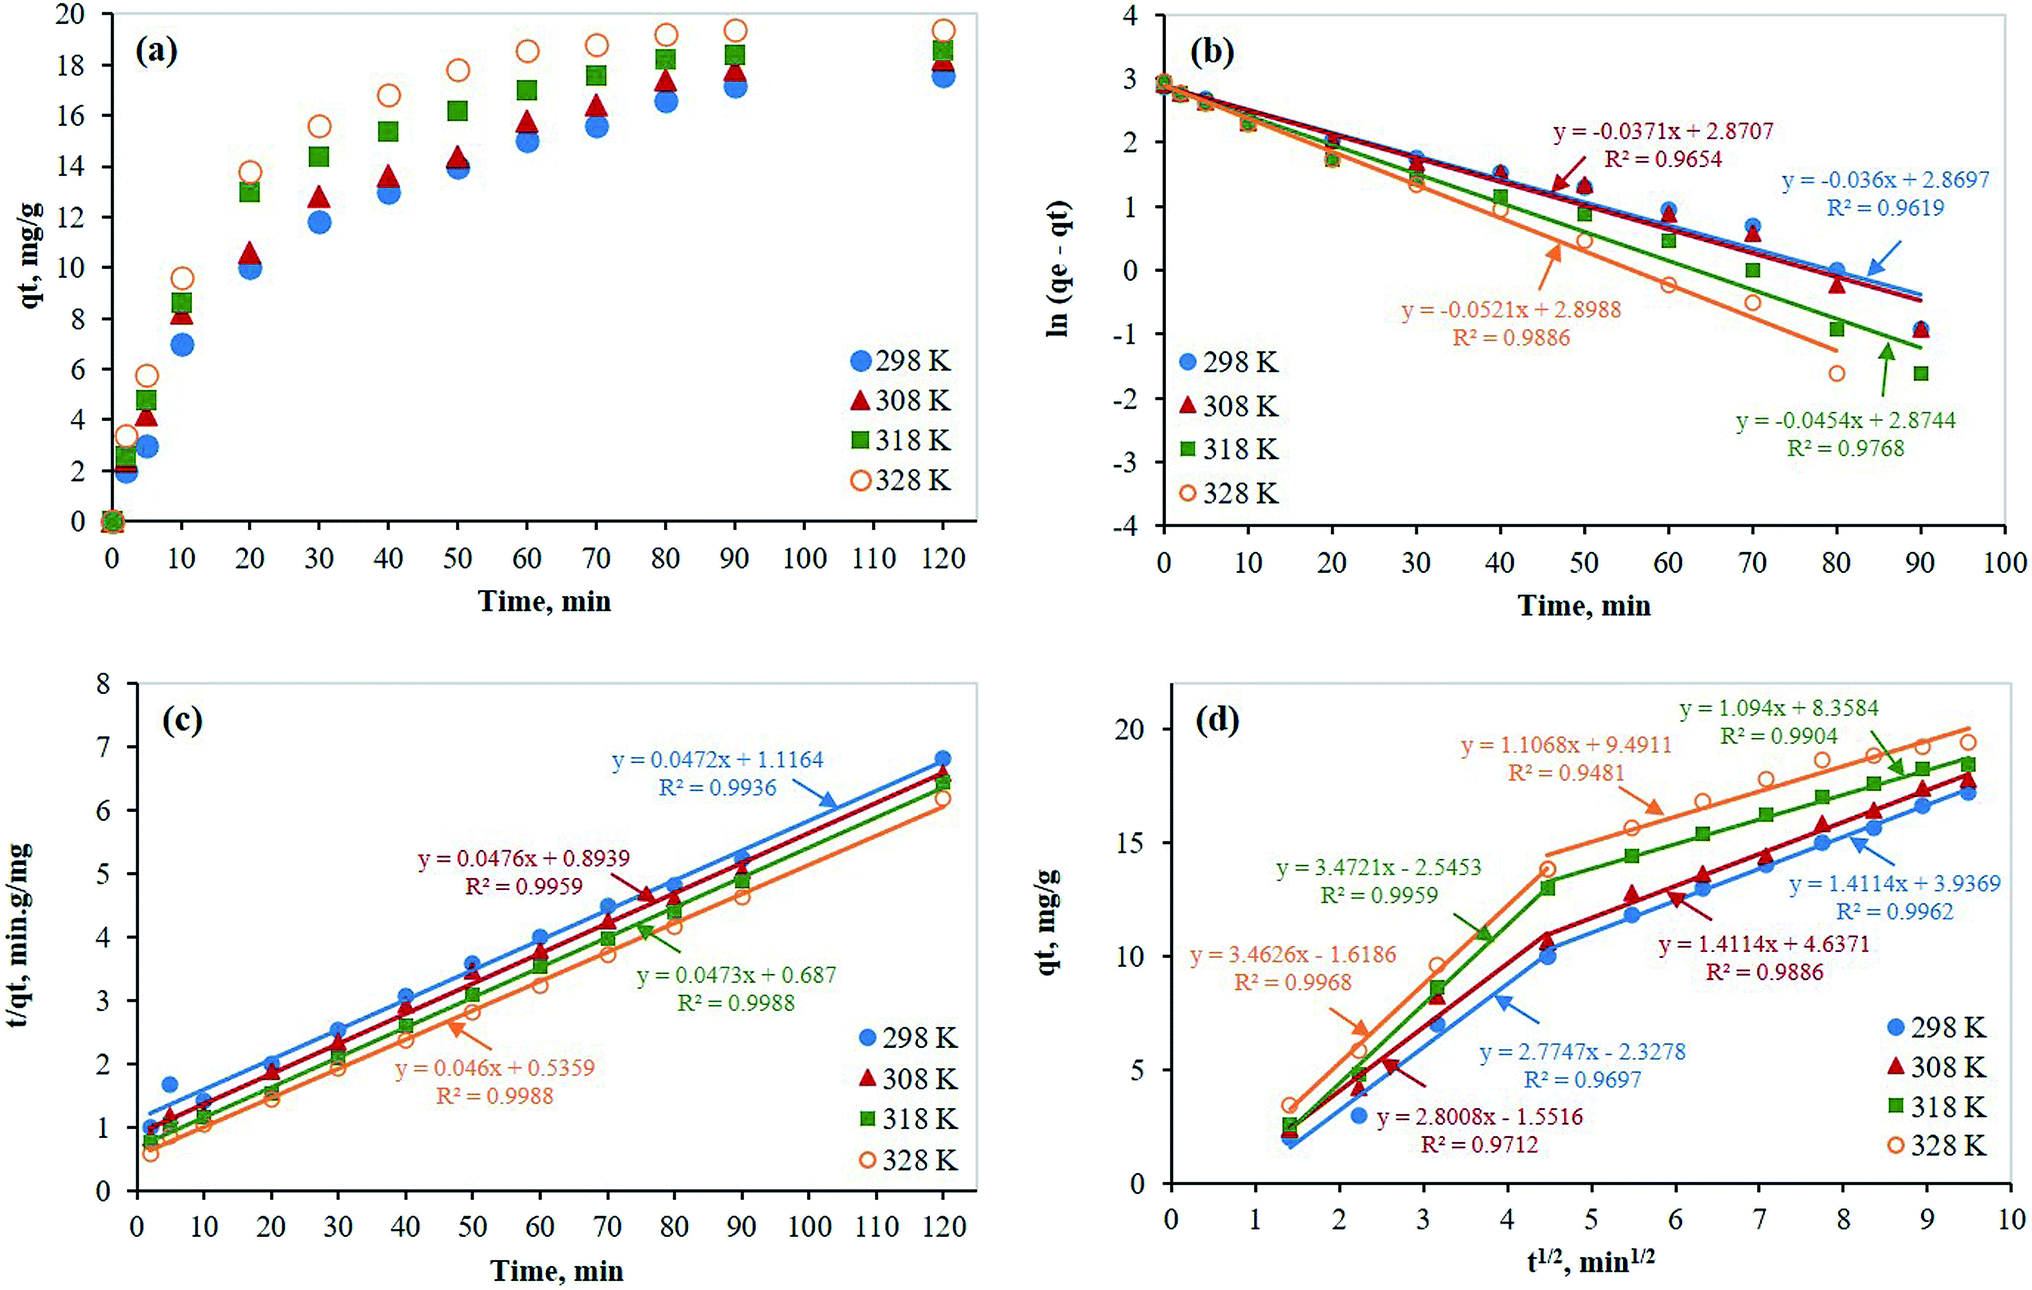 Removal Of Mercury From Polluted Water By A Novel Composite Of Polymer Carbon Nanofiber Kinetic Isotherm And Thermodynamic Studies Rsc Advances Rsc Publishing Doi 10 1039 D0ra0j